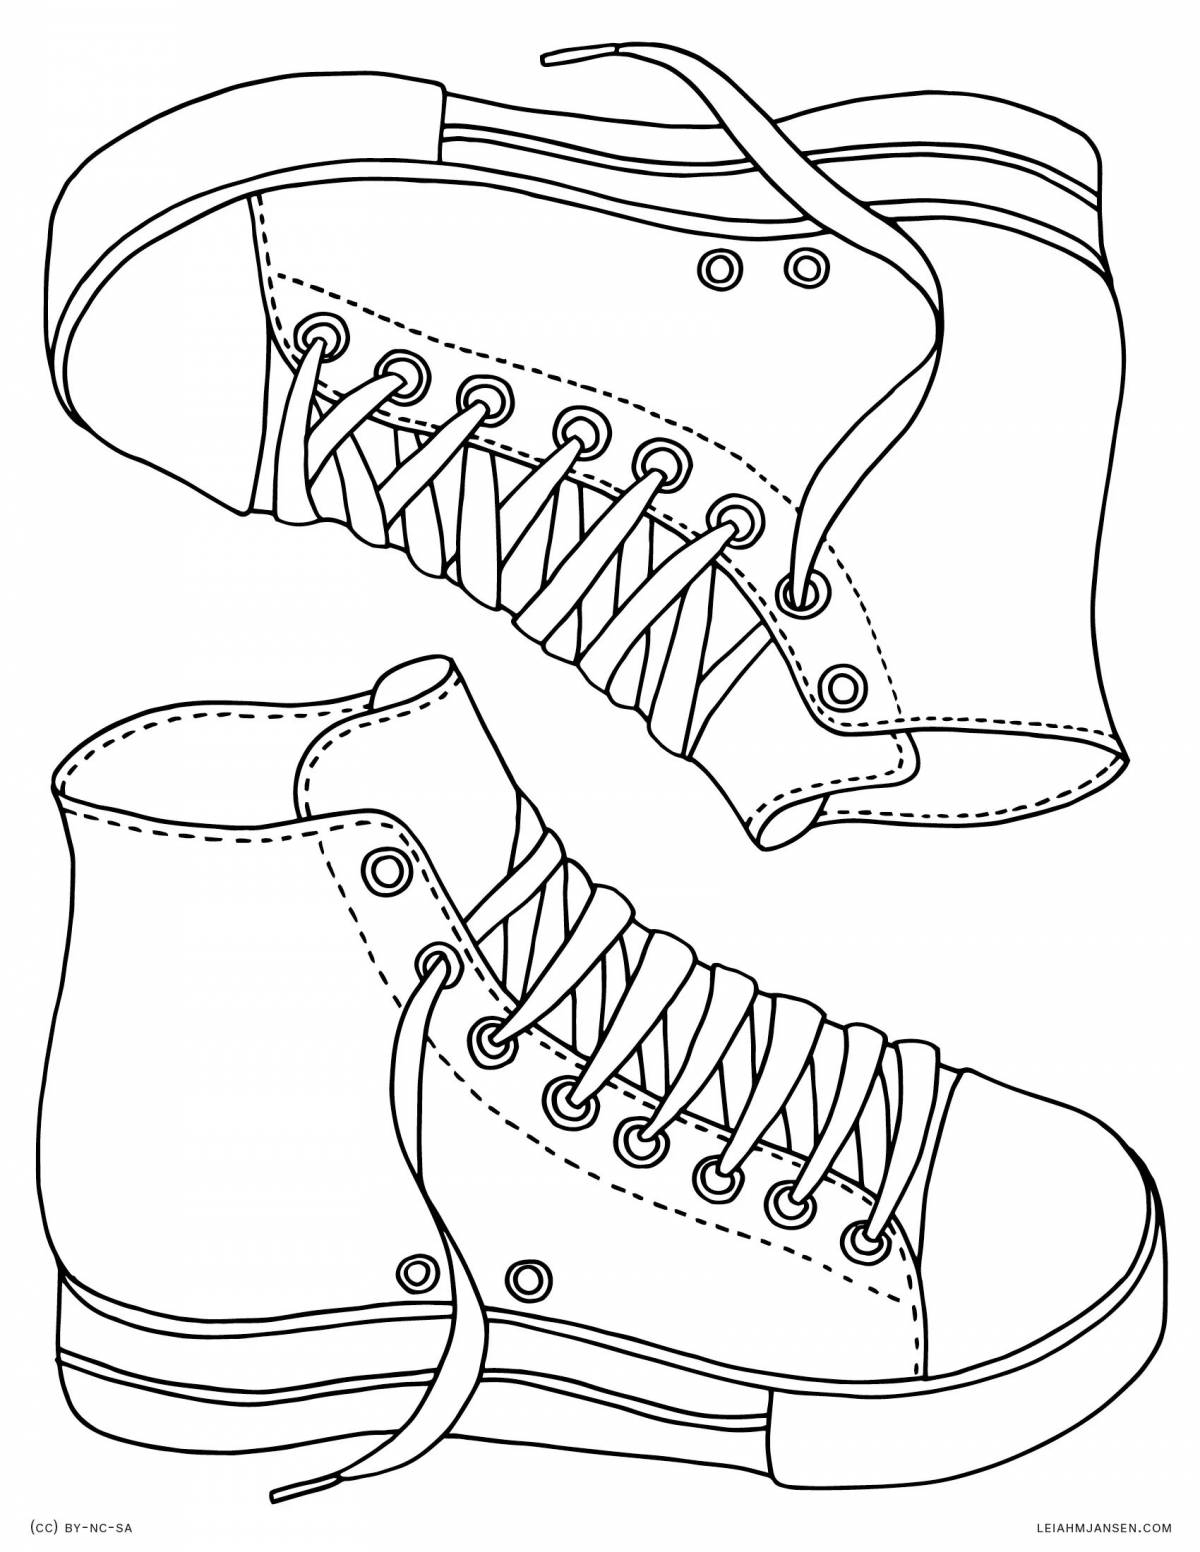 Coloring radiant sneakers for babies